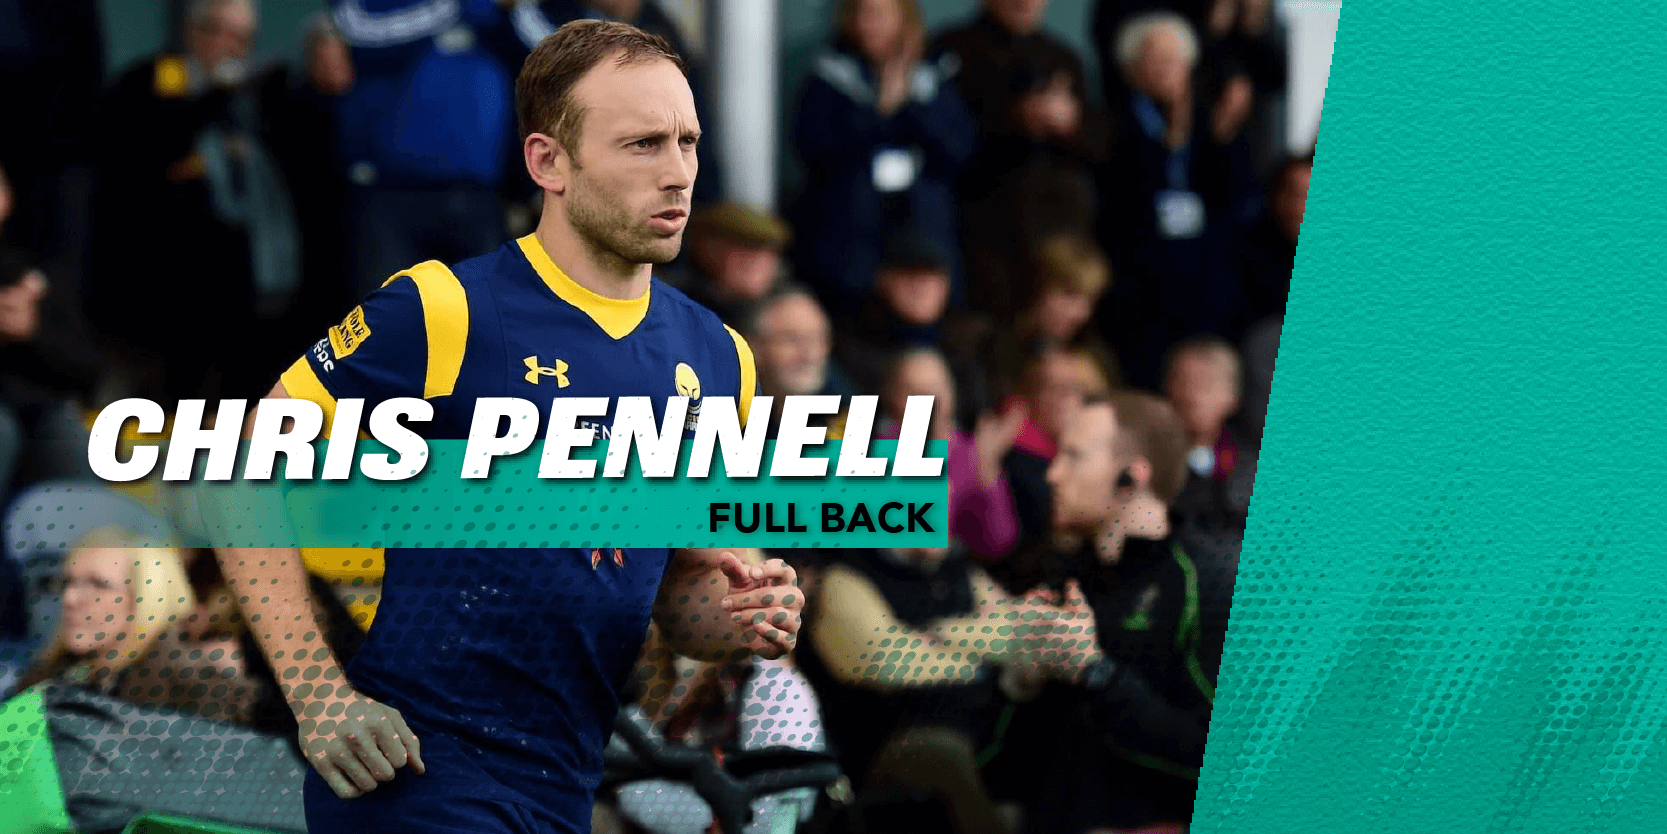 Worcester Warrior Legend Chris Pennell Signs With The Jackals